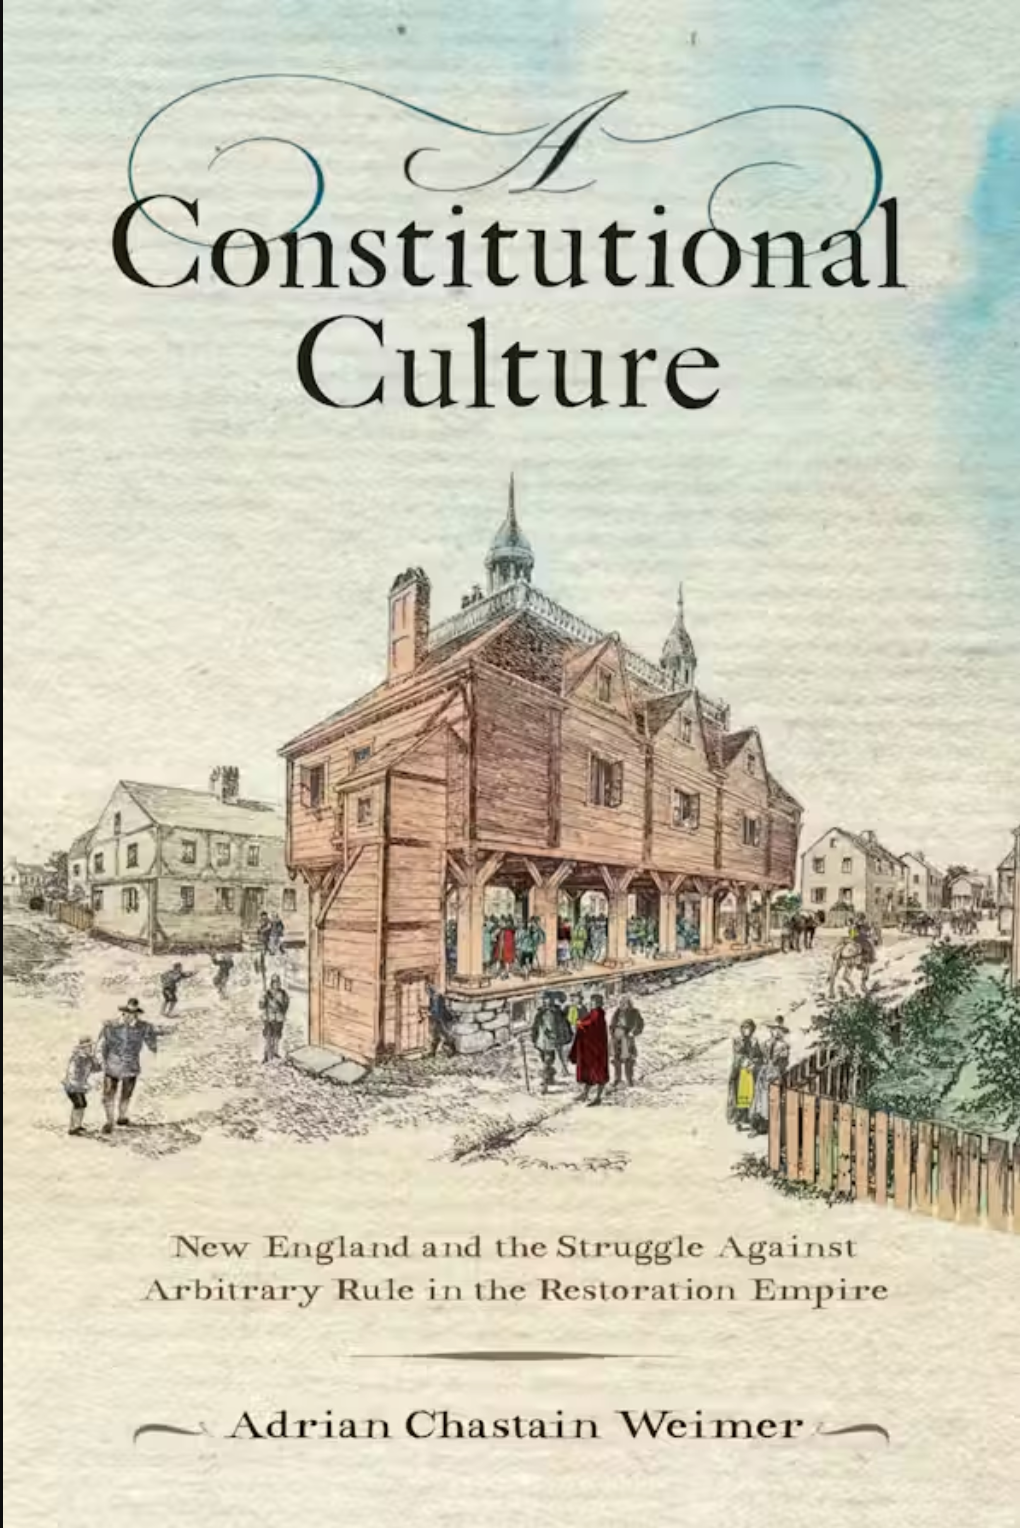 Book Cover for Weimer's Constitutional Culture